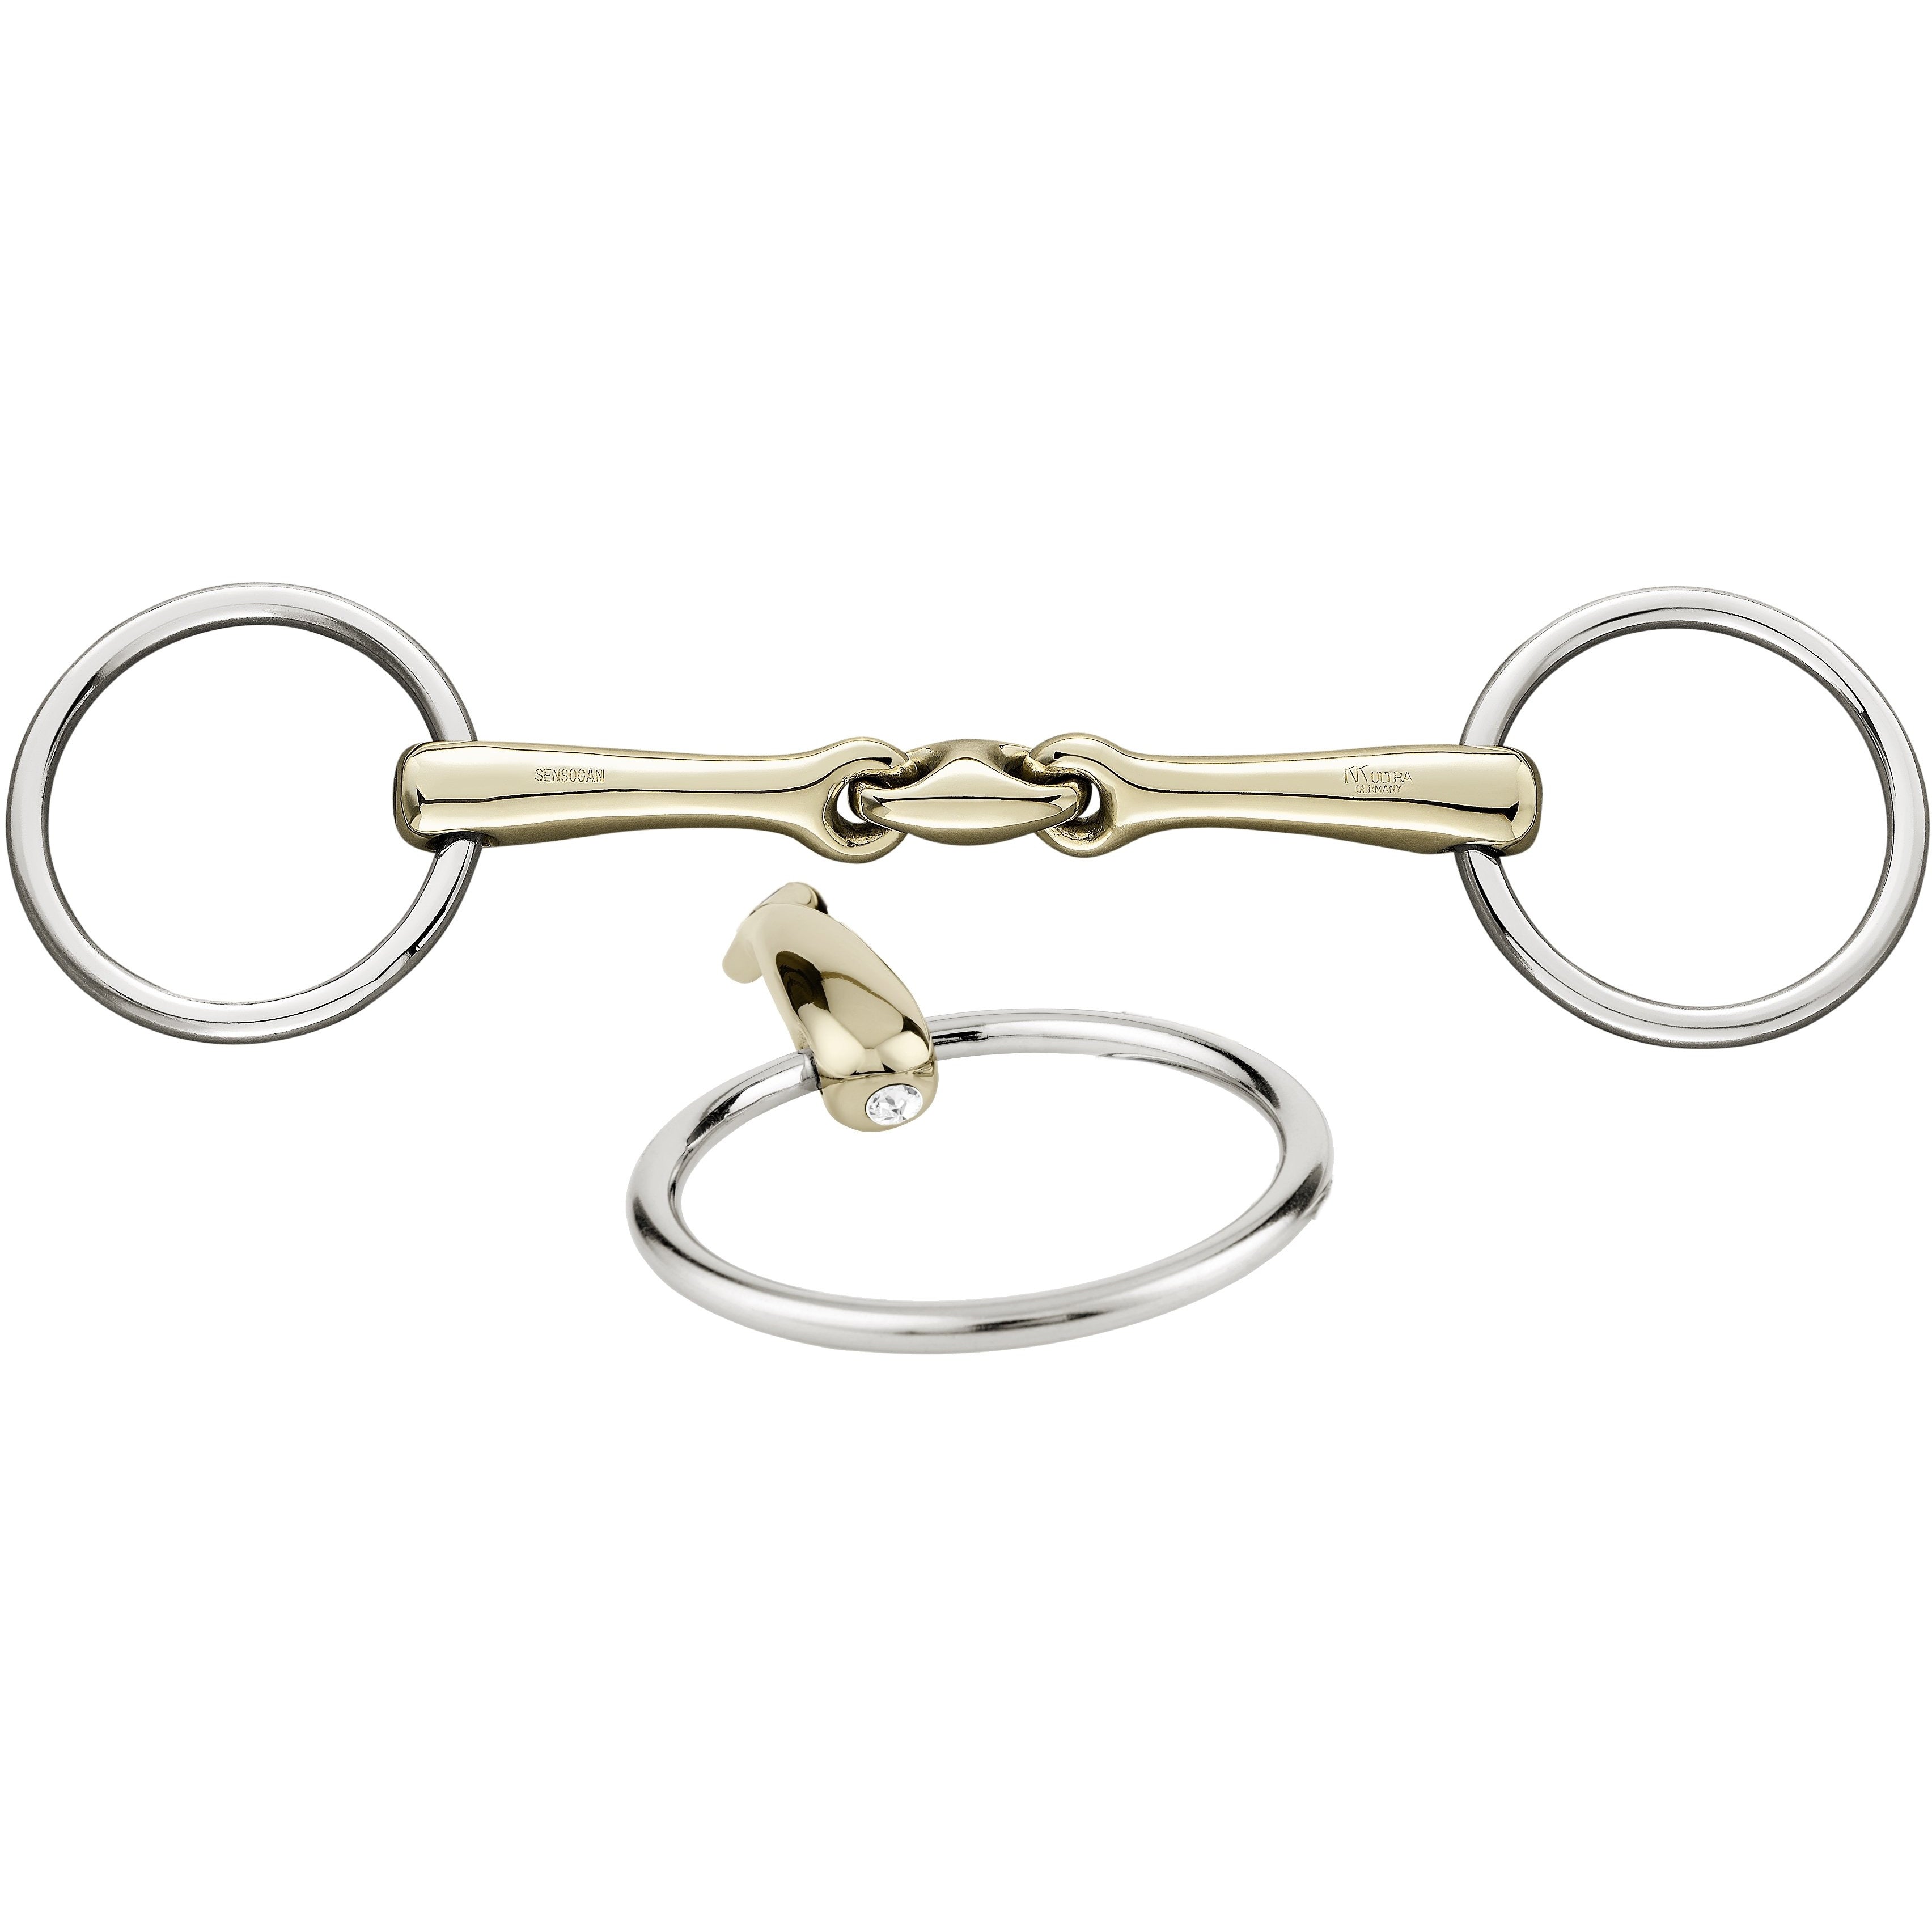 Sprenger 40426 Dynamic RS Loose ring Snaffle 16mm - Shine Bright Edition - TO ORDER